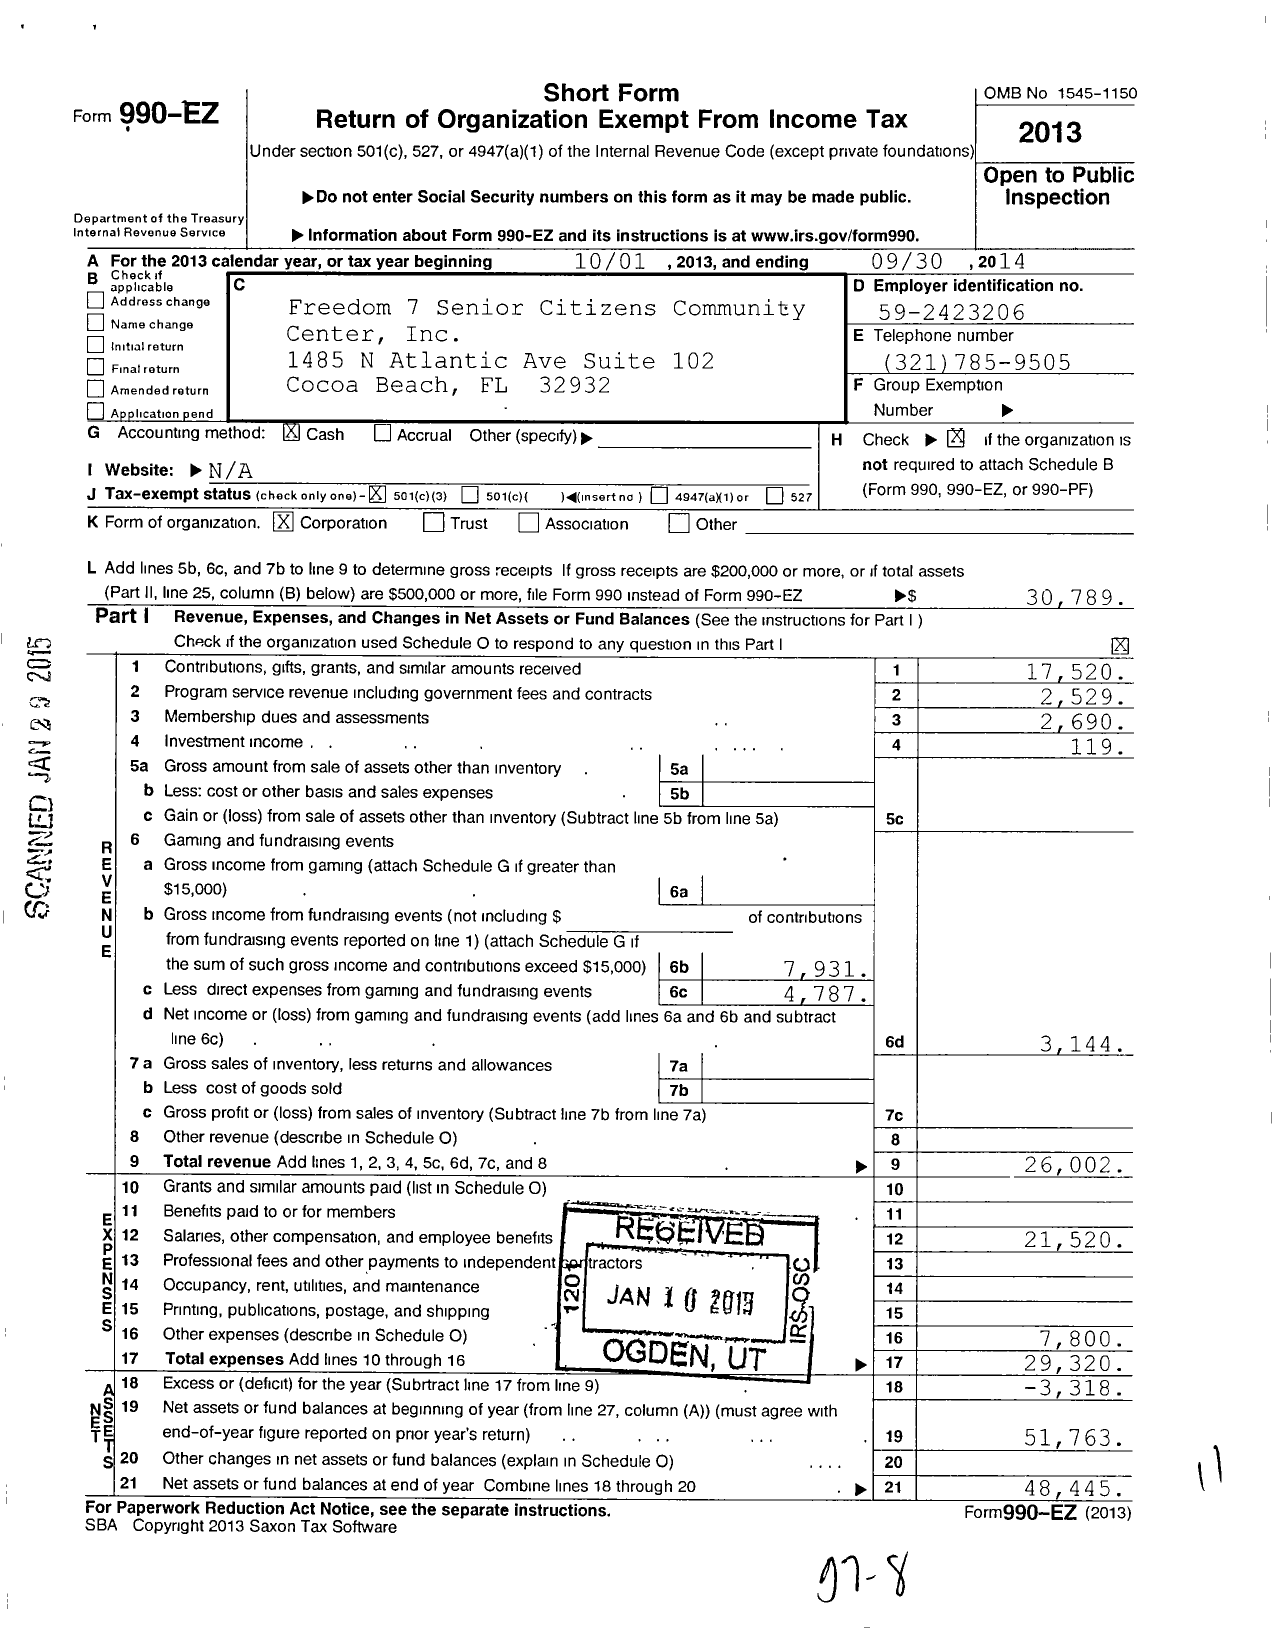 Image of first page of 2013 Form 990EZ for Freedom Seven Senior Citizens Community Center